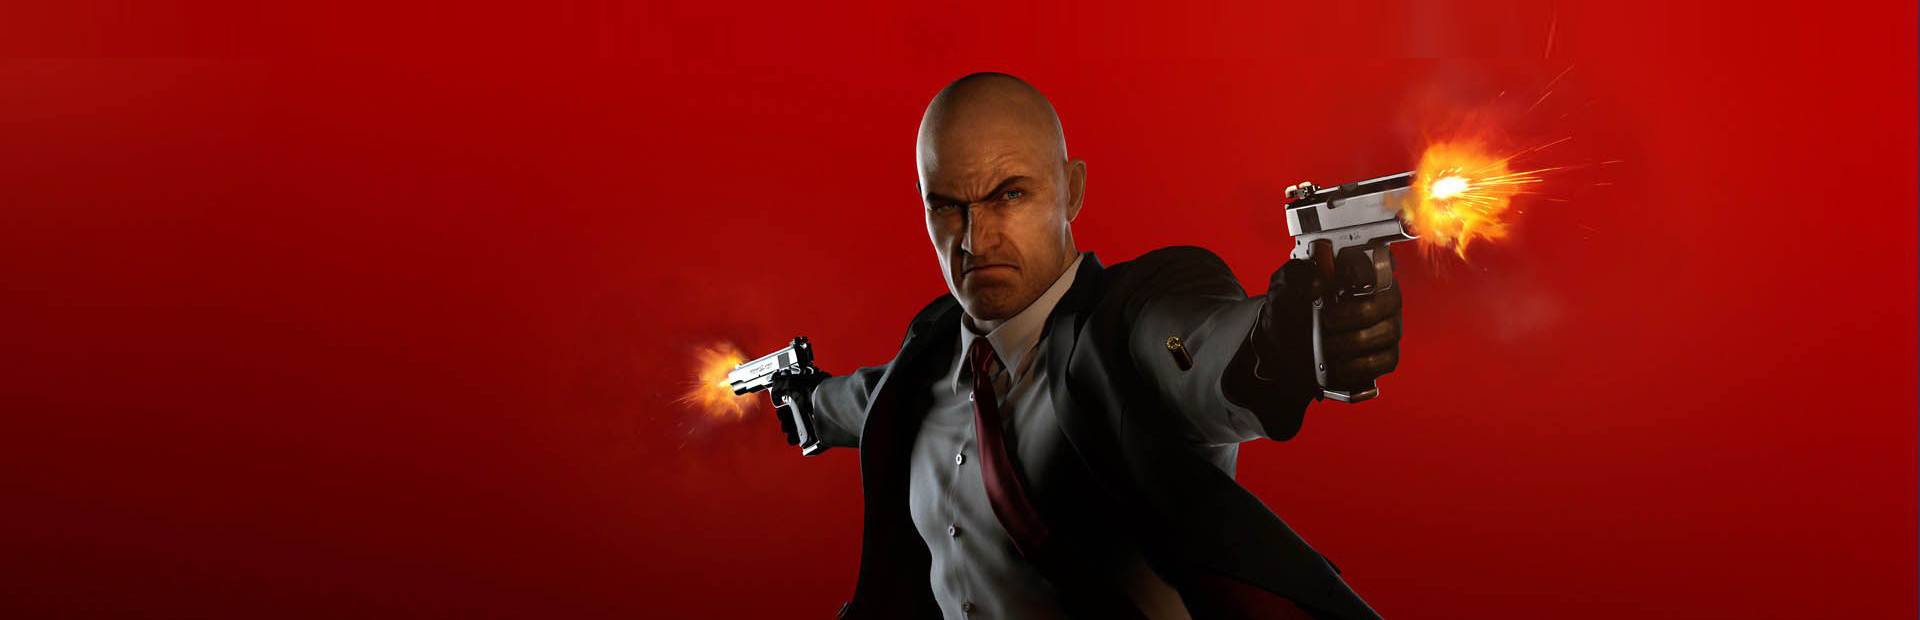 Hitman: Absolution™ cover image